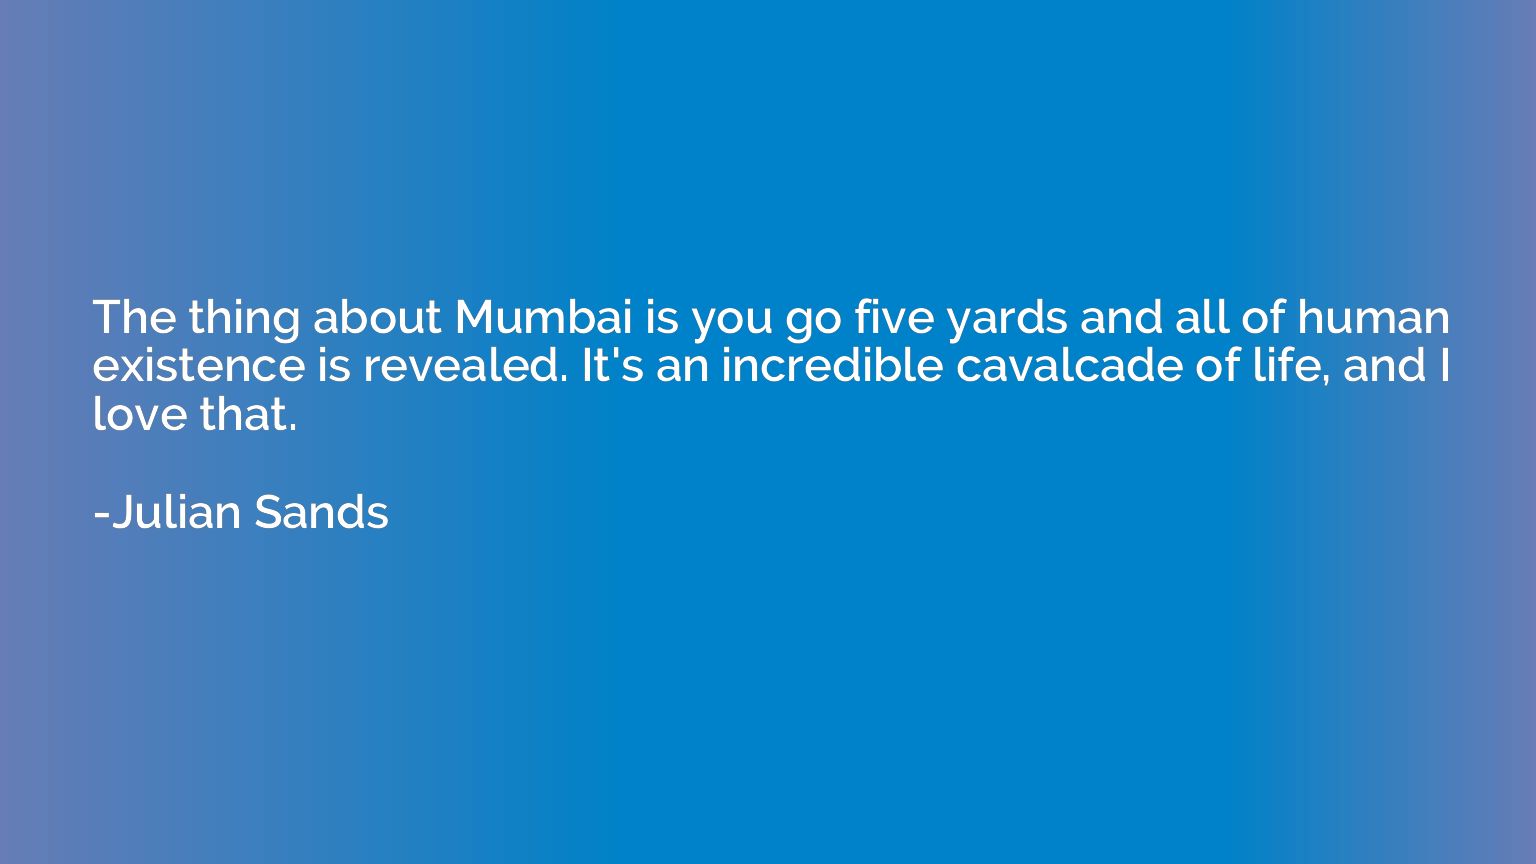 The thing about Mumbai is you go five yards and all of human